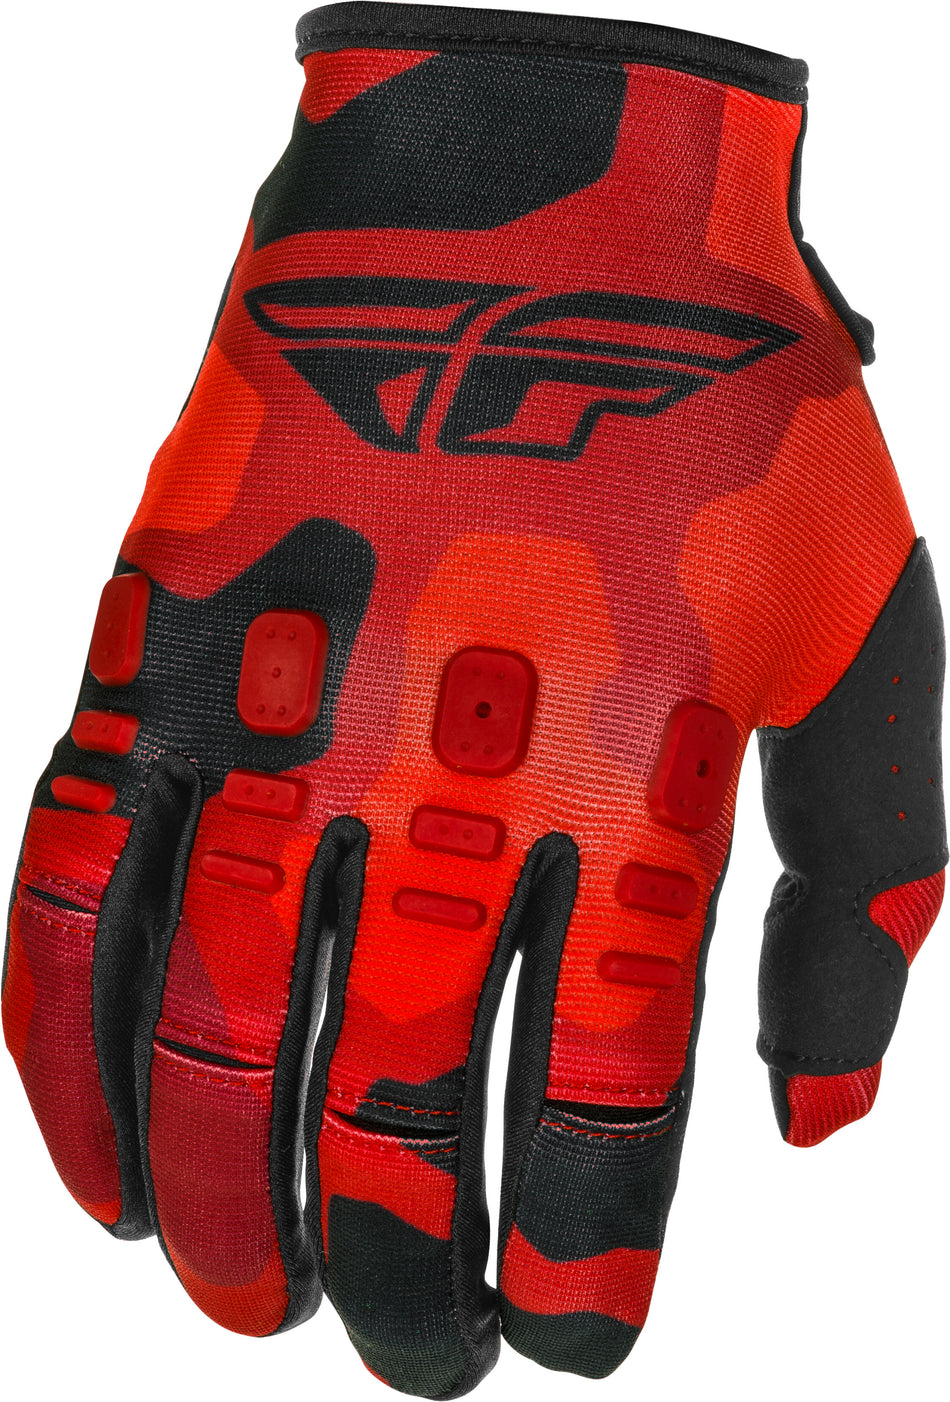 FLY RACING Youth Kinetic K221 Gloves Red/Black Sz 06 374-51206